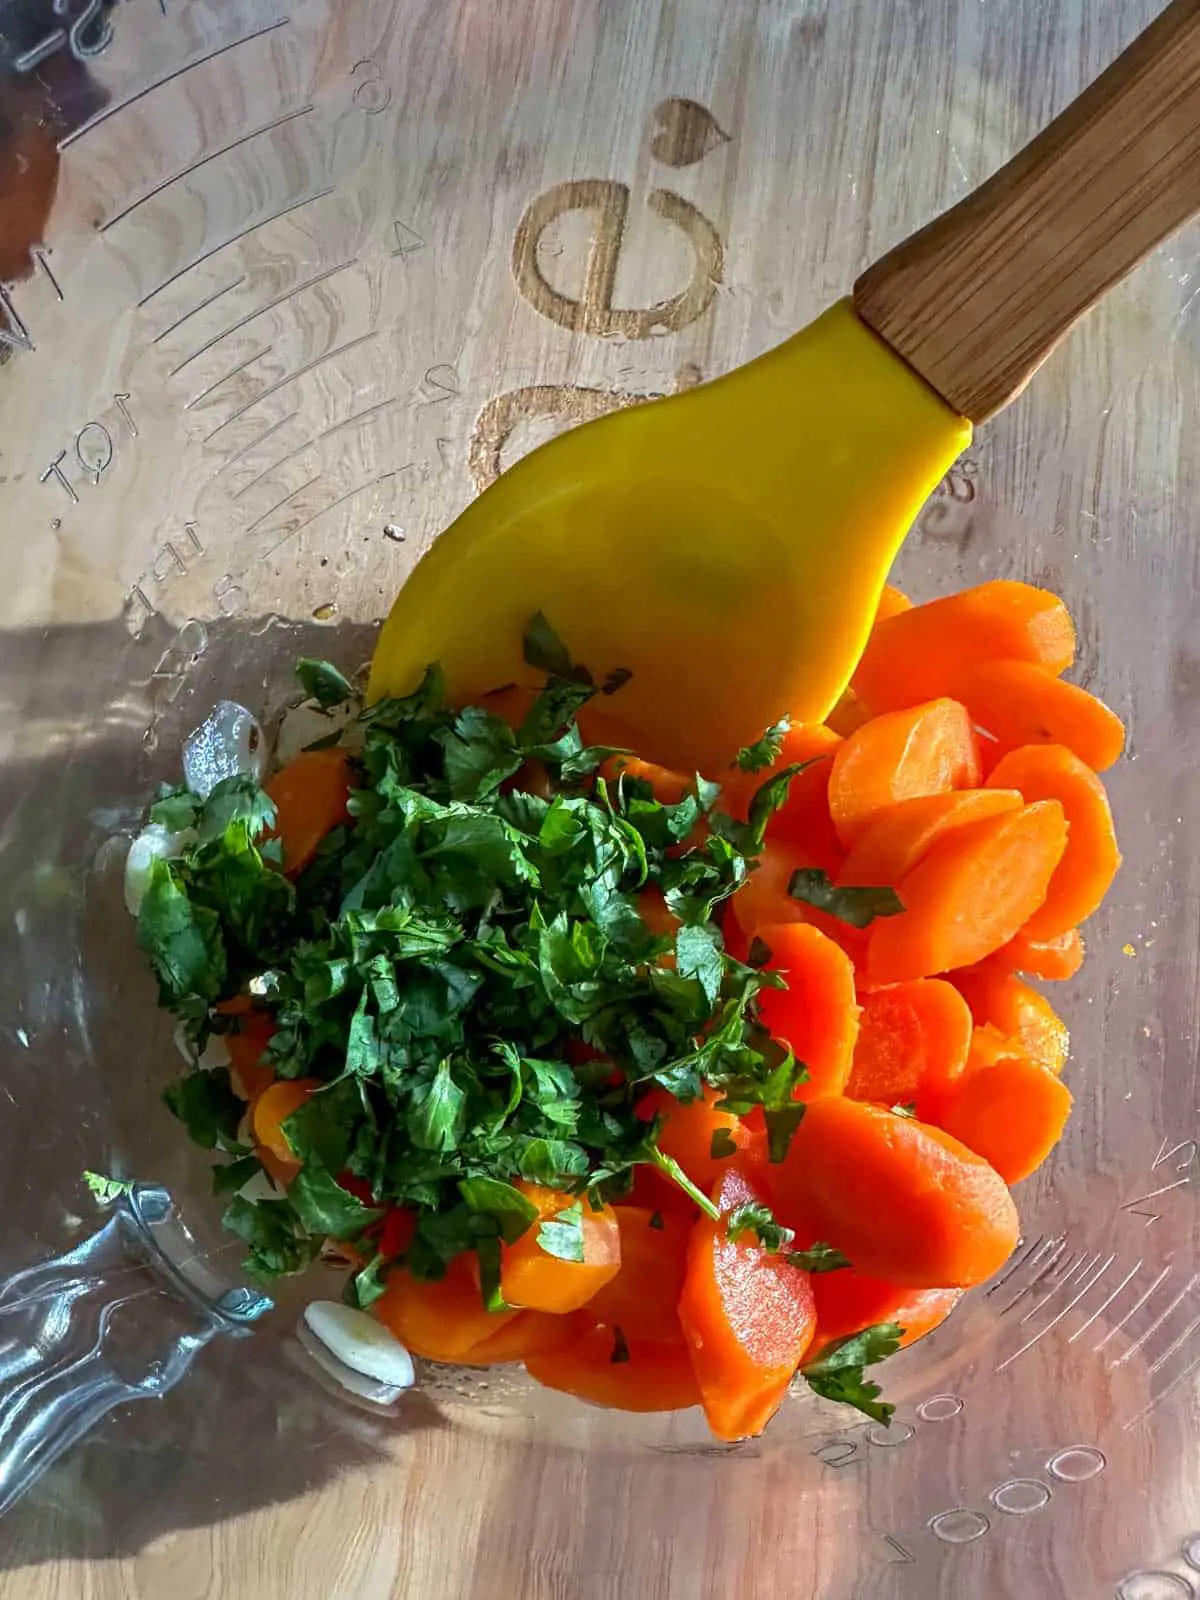 Sliced carrots, sliced garlic, and finely chopped cilantro in a glass bowl with a yellow spoon.